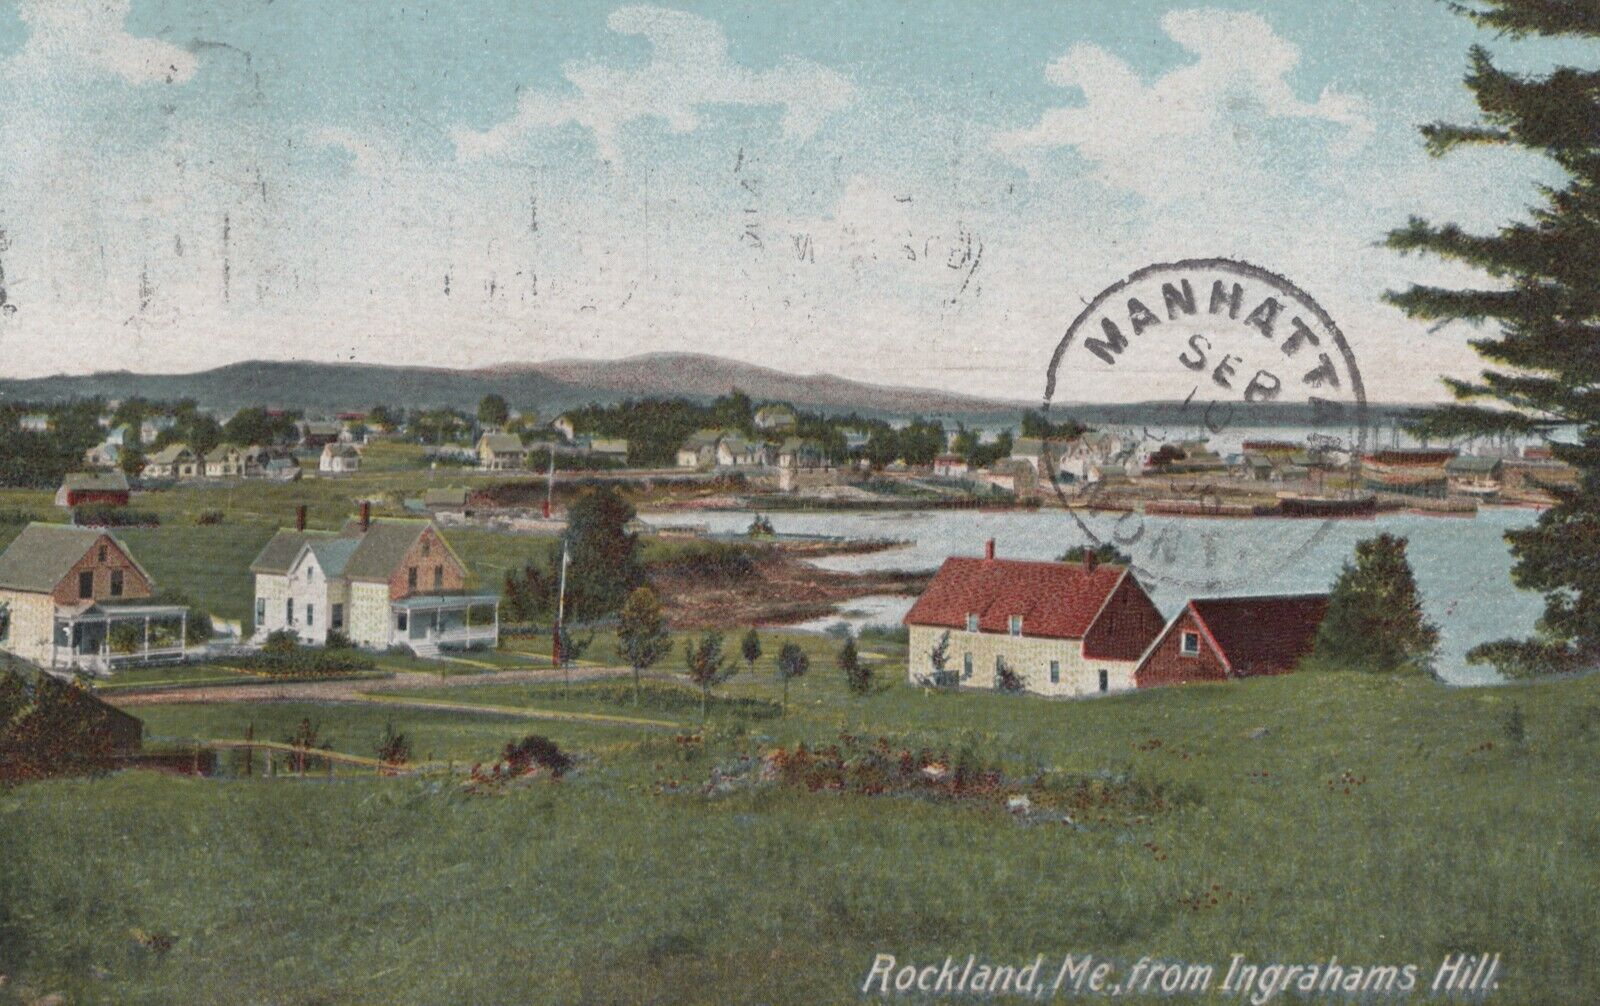 Rockland Maine Undivided Back Vintage Post Card View from Ingrahams Hill